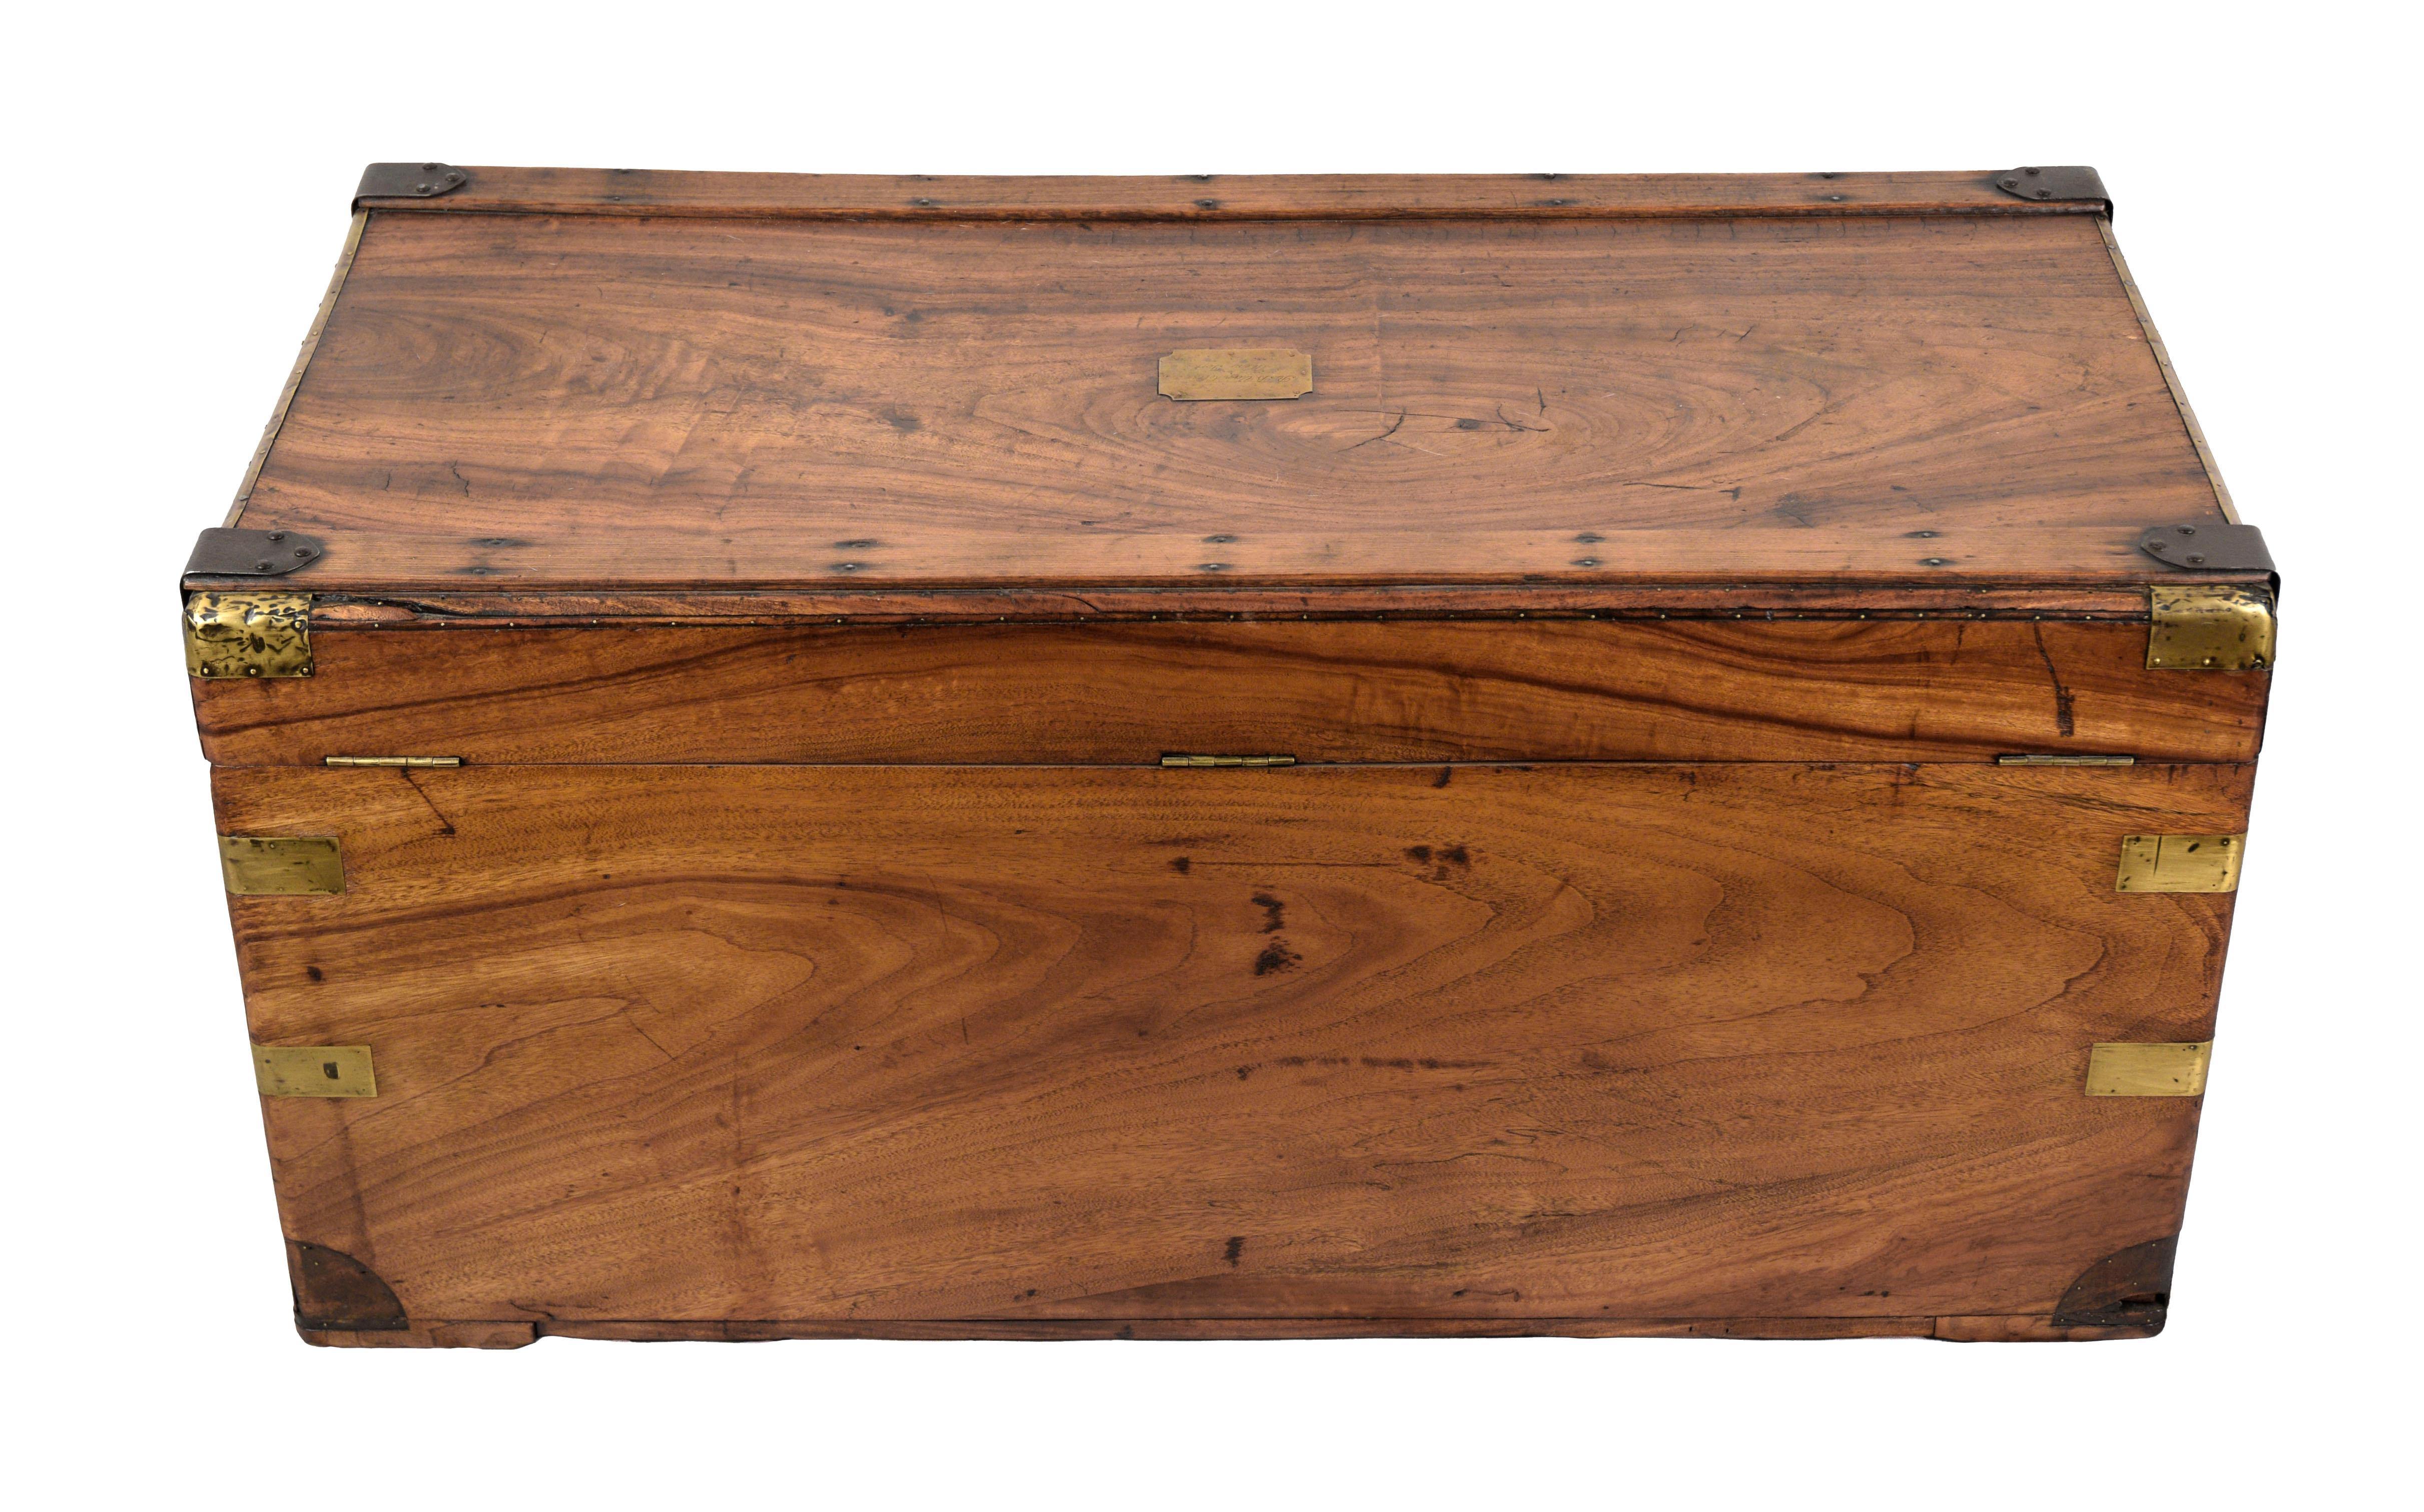 Camphorwood Campaign Chest - Late 19th Century Chinese Export R.B. Van Cleve, NY For Sale 3